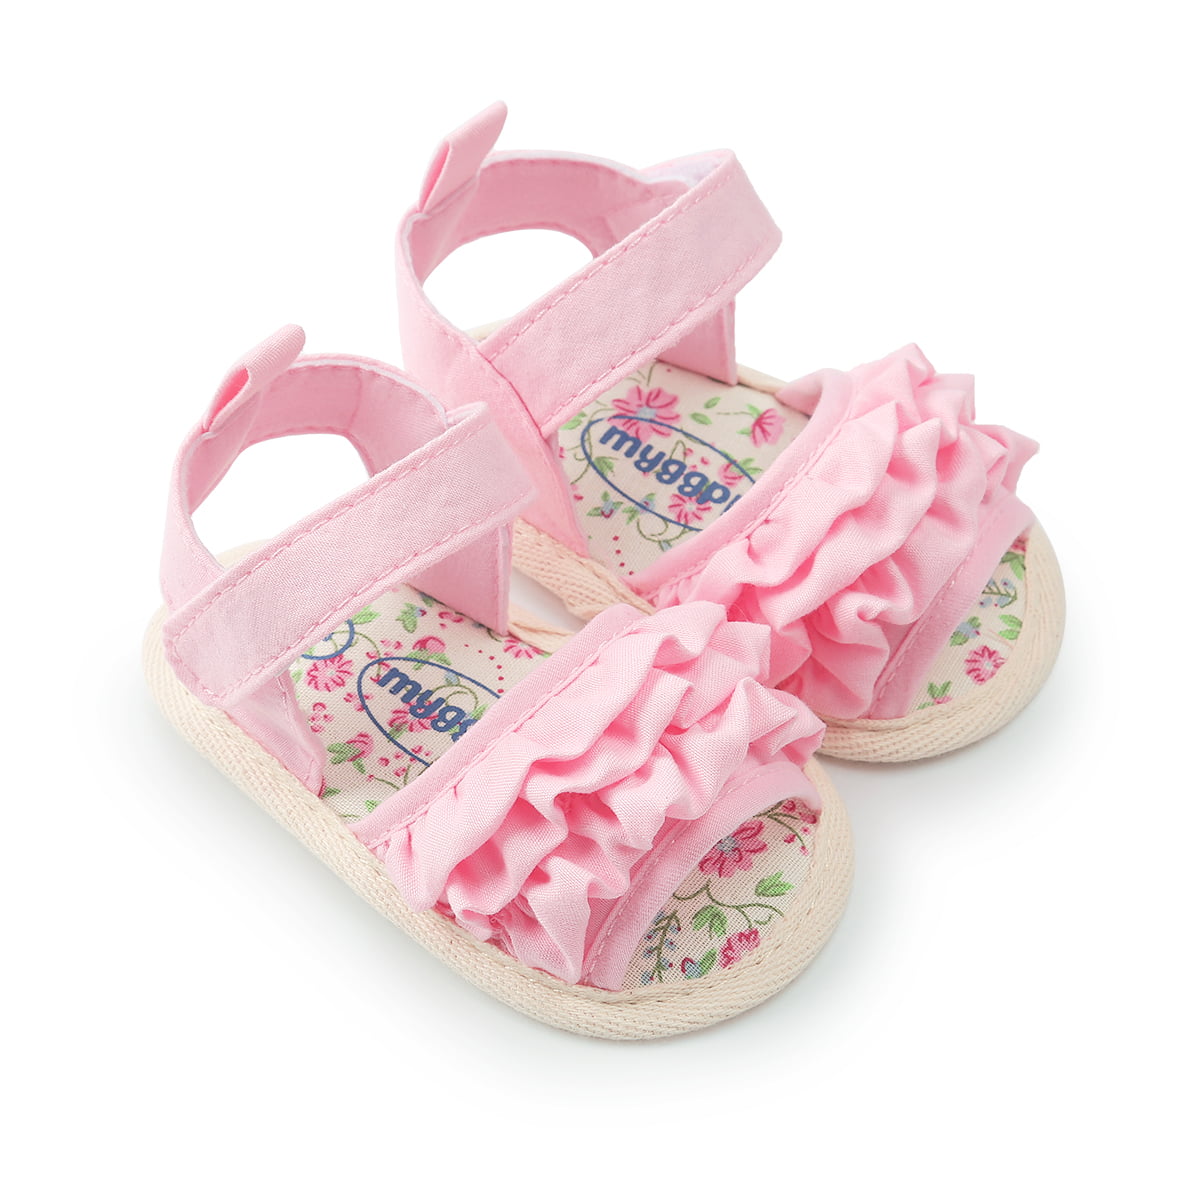 Newborn Baby Girl Soft Sole Crib Shoes Infant Toddler Summer Sandals Size 4-9 